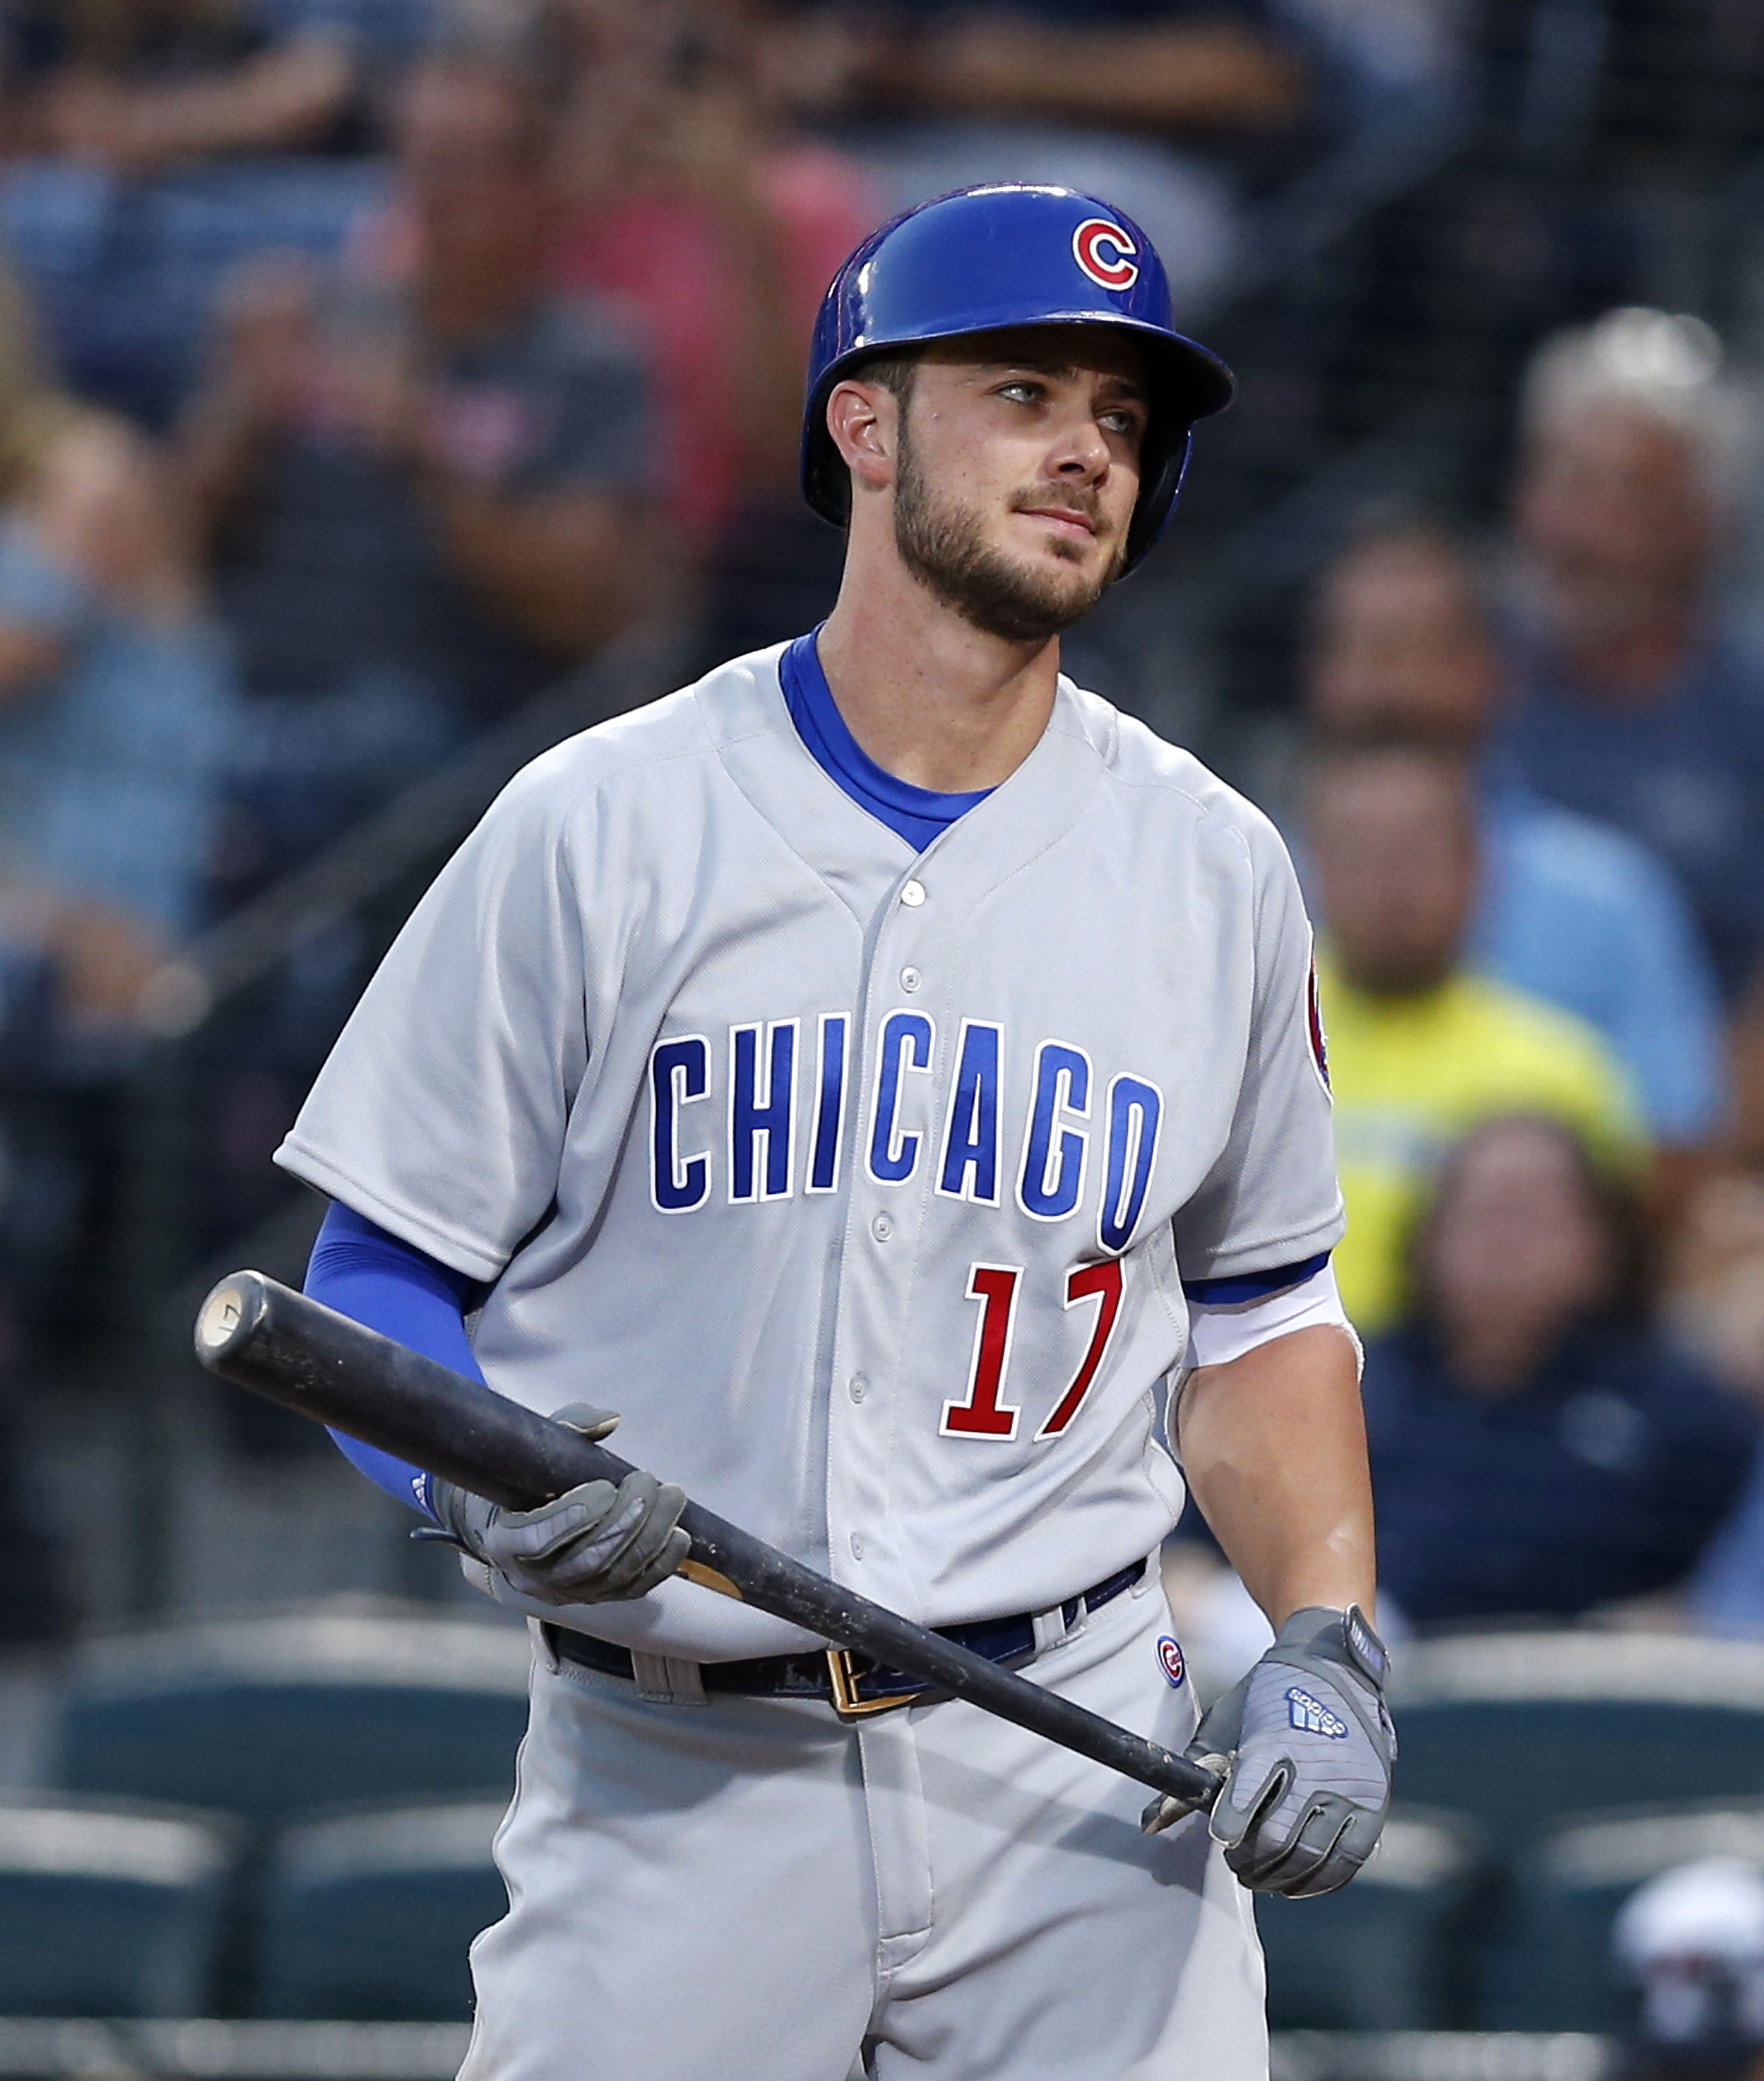 ATLANTA, GA - JUNE 10: Third baseman Kris Bryant #17 of the Chicago Cubs reacts to striking out in the fourth inning during the game against the Atlanta Braves at Turner Field on June 10, 2016 in Atlanta, Georgia. Mike Zarrilli/Getty Images/AFP